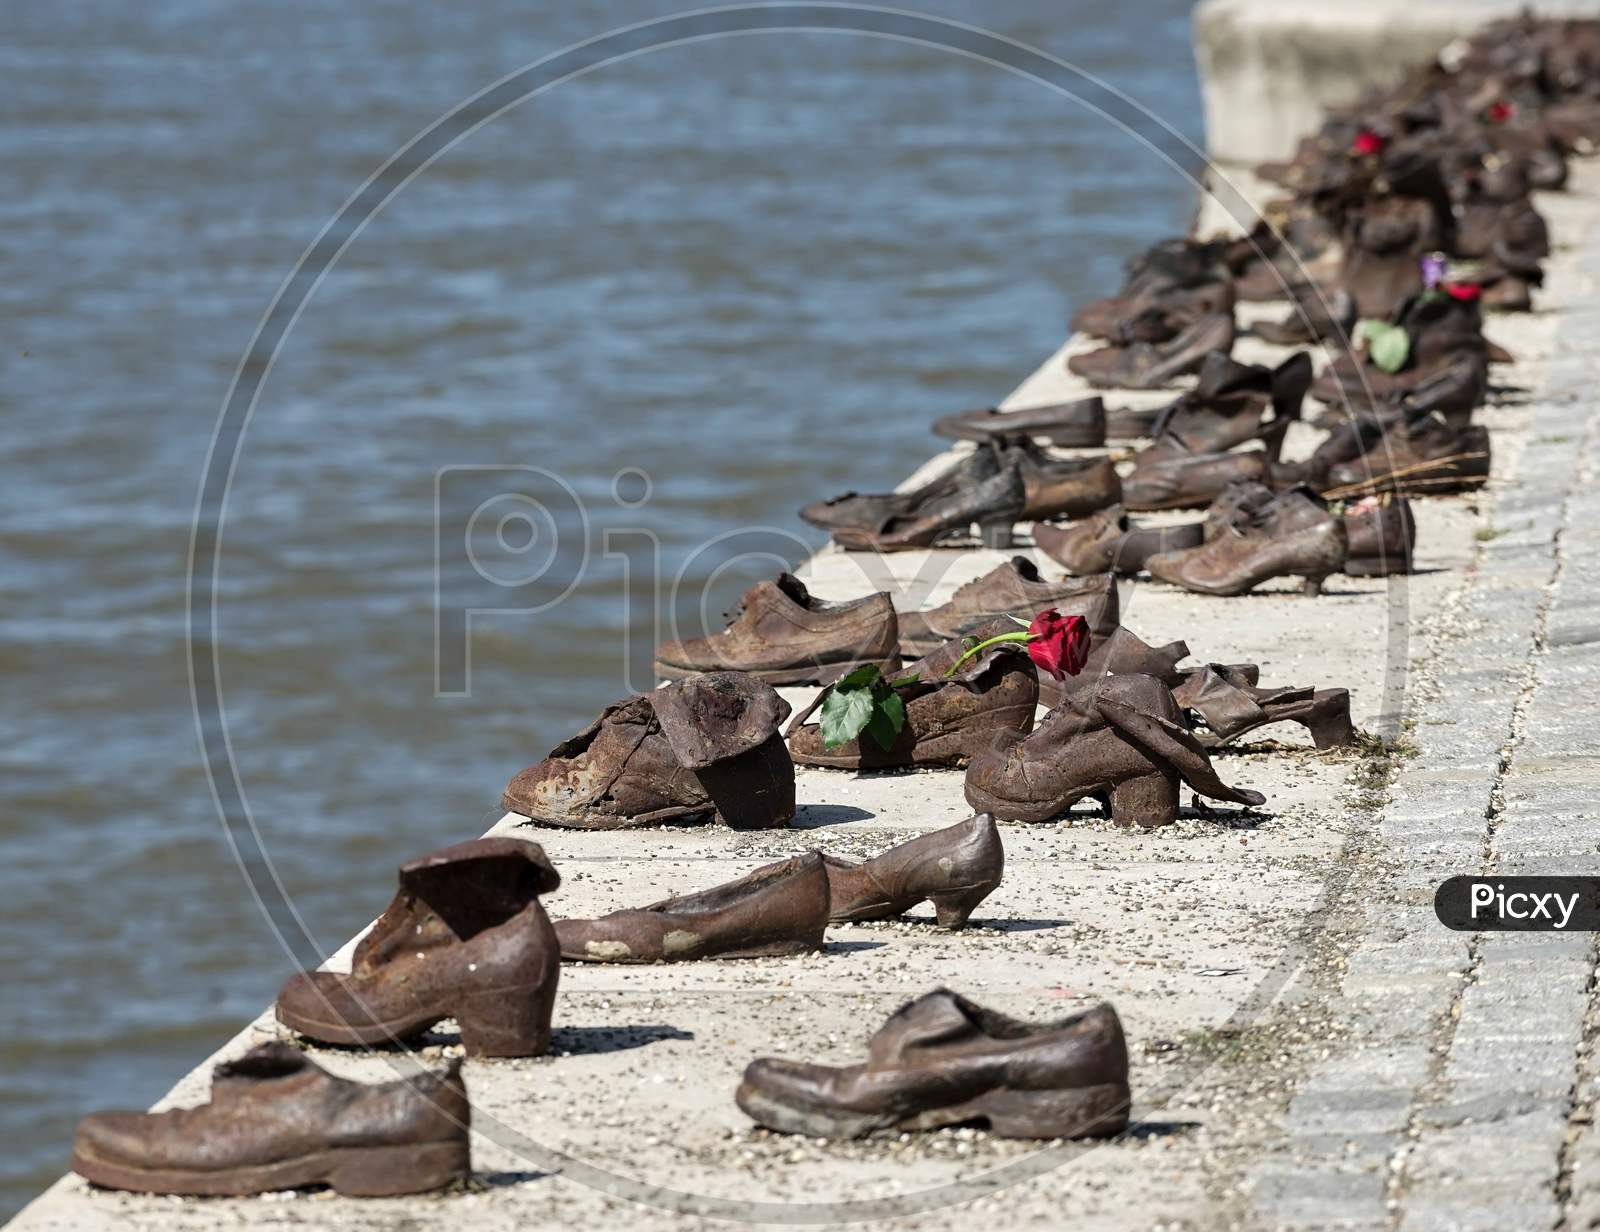 Iron Shoes Memorial To Jewish People Executed Ww2 In Budapest